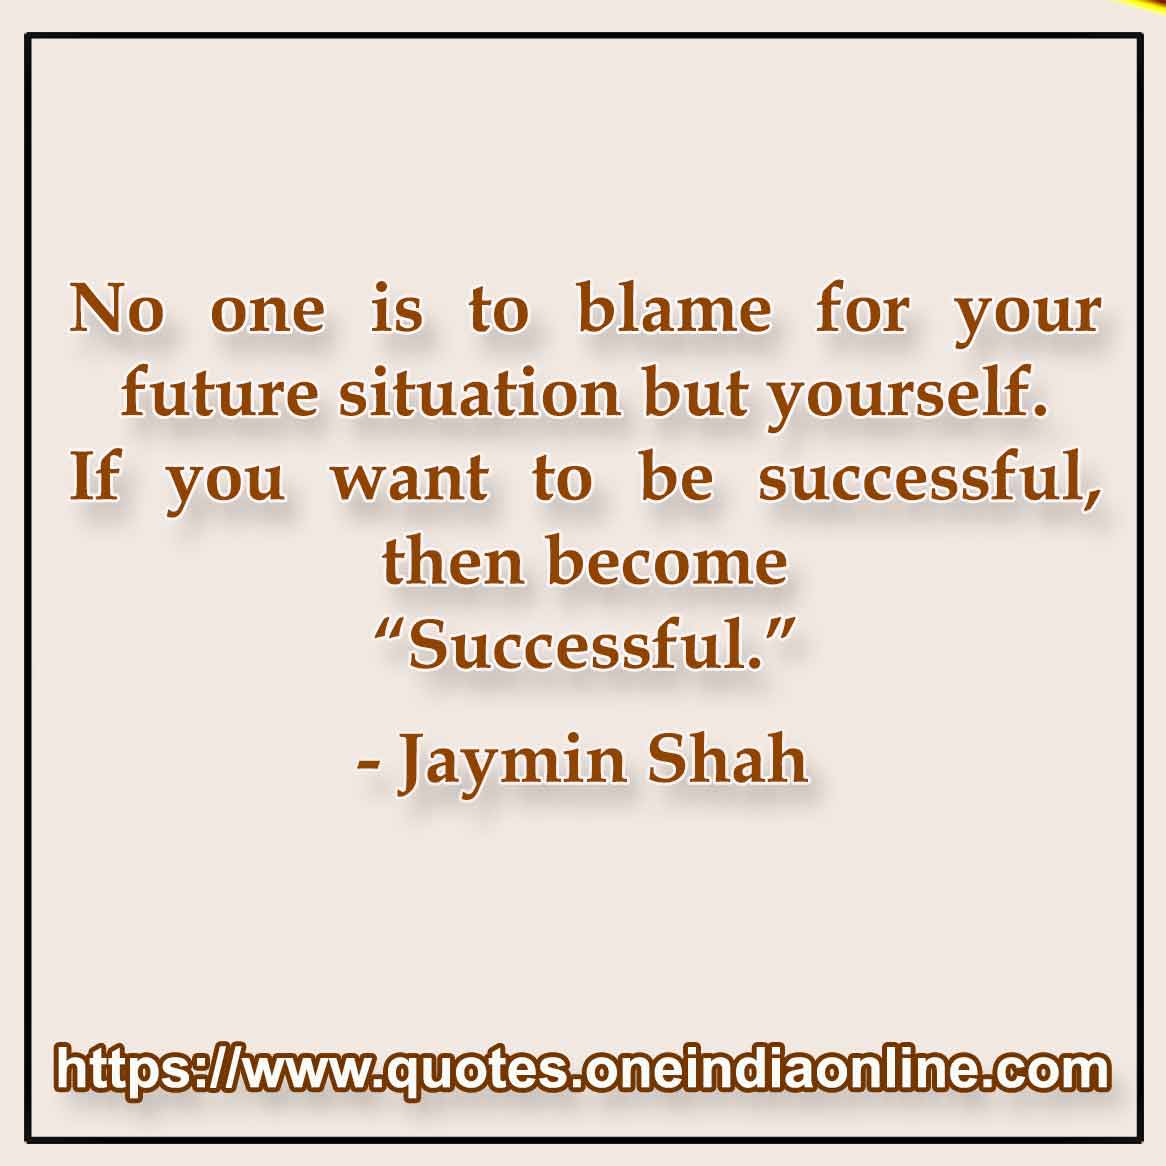 No one is to blame for your future situation but yourself. If you want to be successful, then become “Successful.”

-  Jaymin Shah